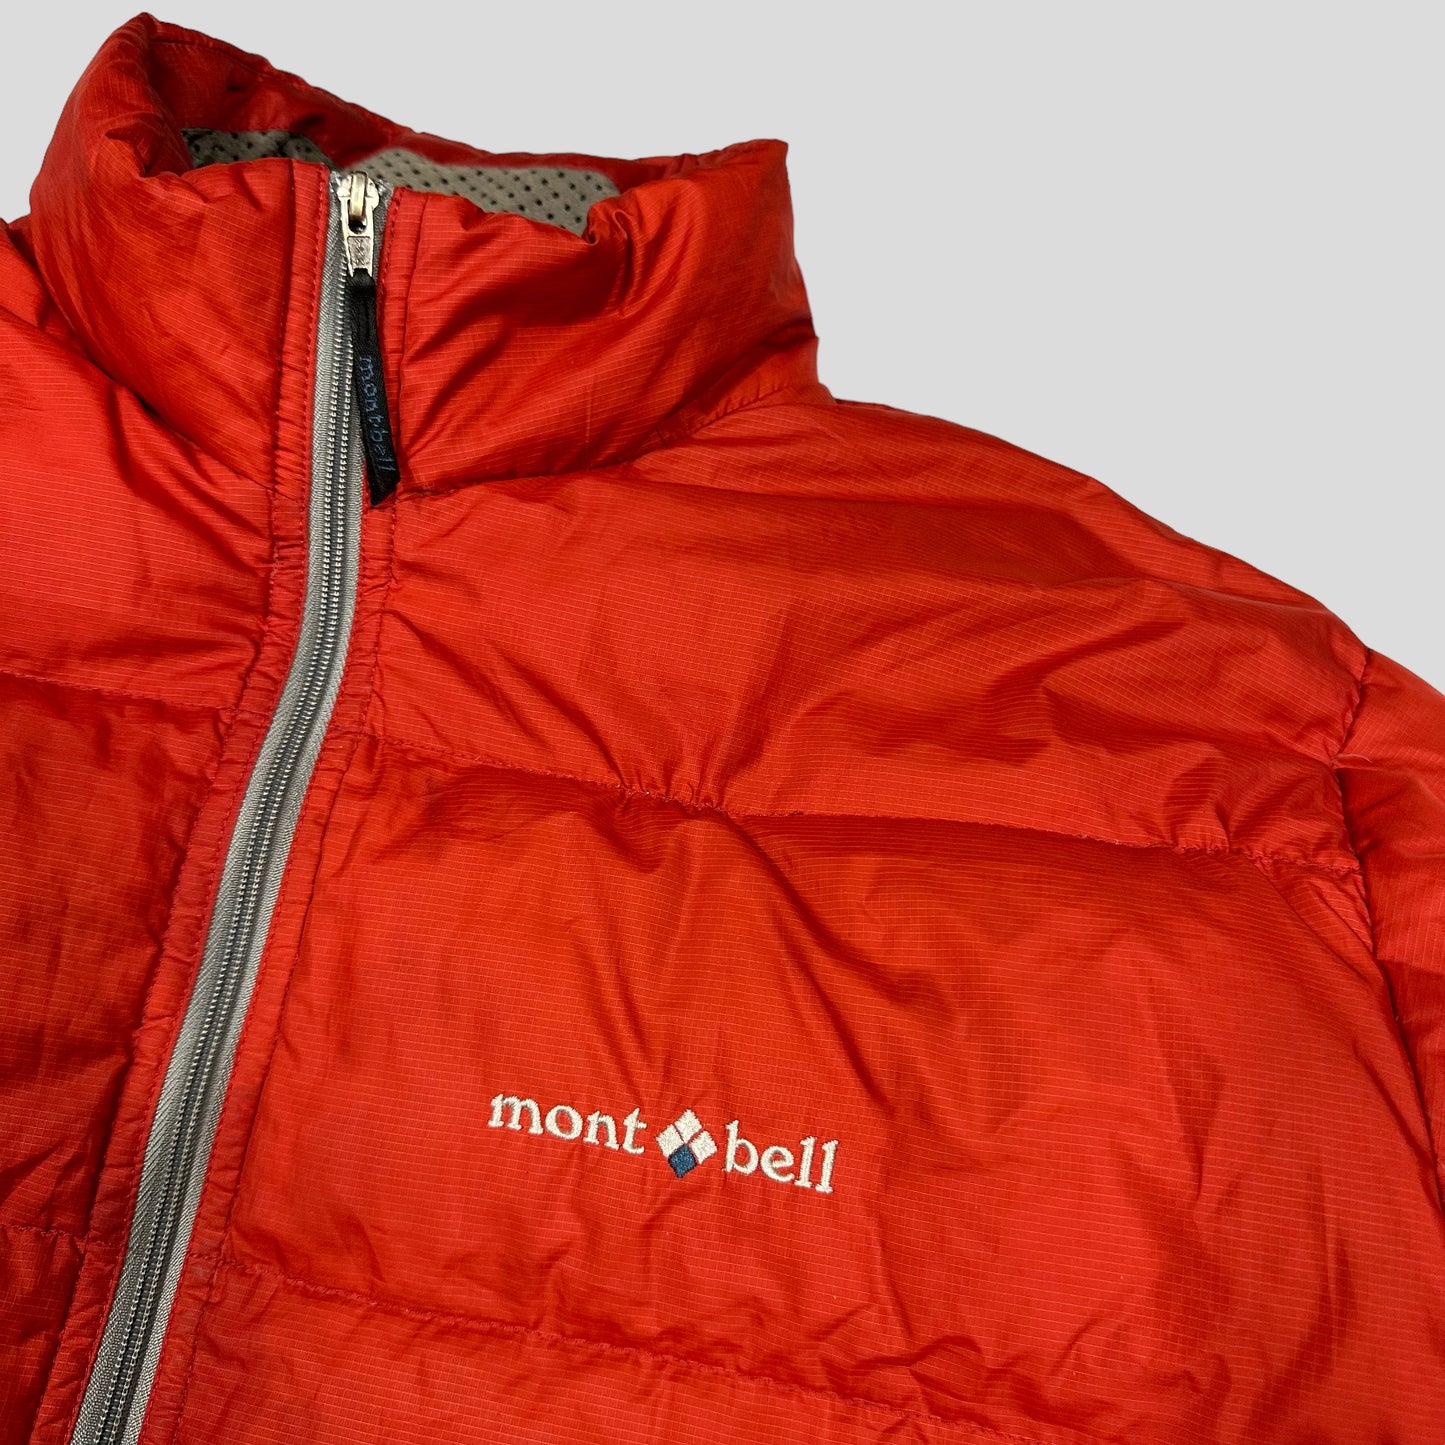 Montbell 00’s Orange & Grey Down Fill Puffer Jacket - XL